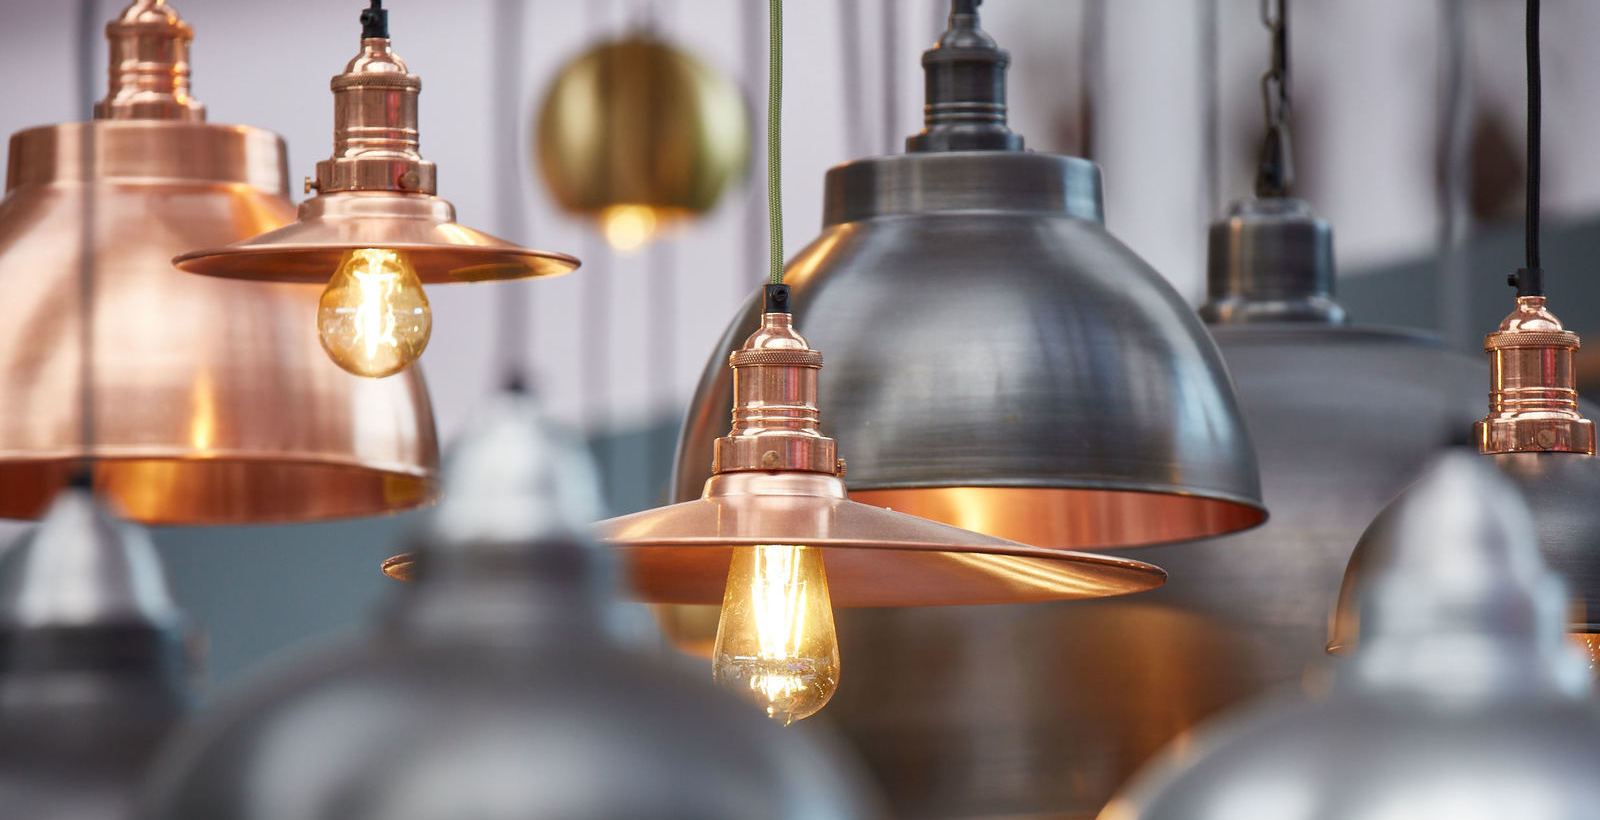 Industville are the makers of handcrafted, high-quality, uniquely designed industrial style lights and furniture